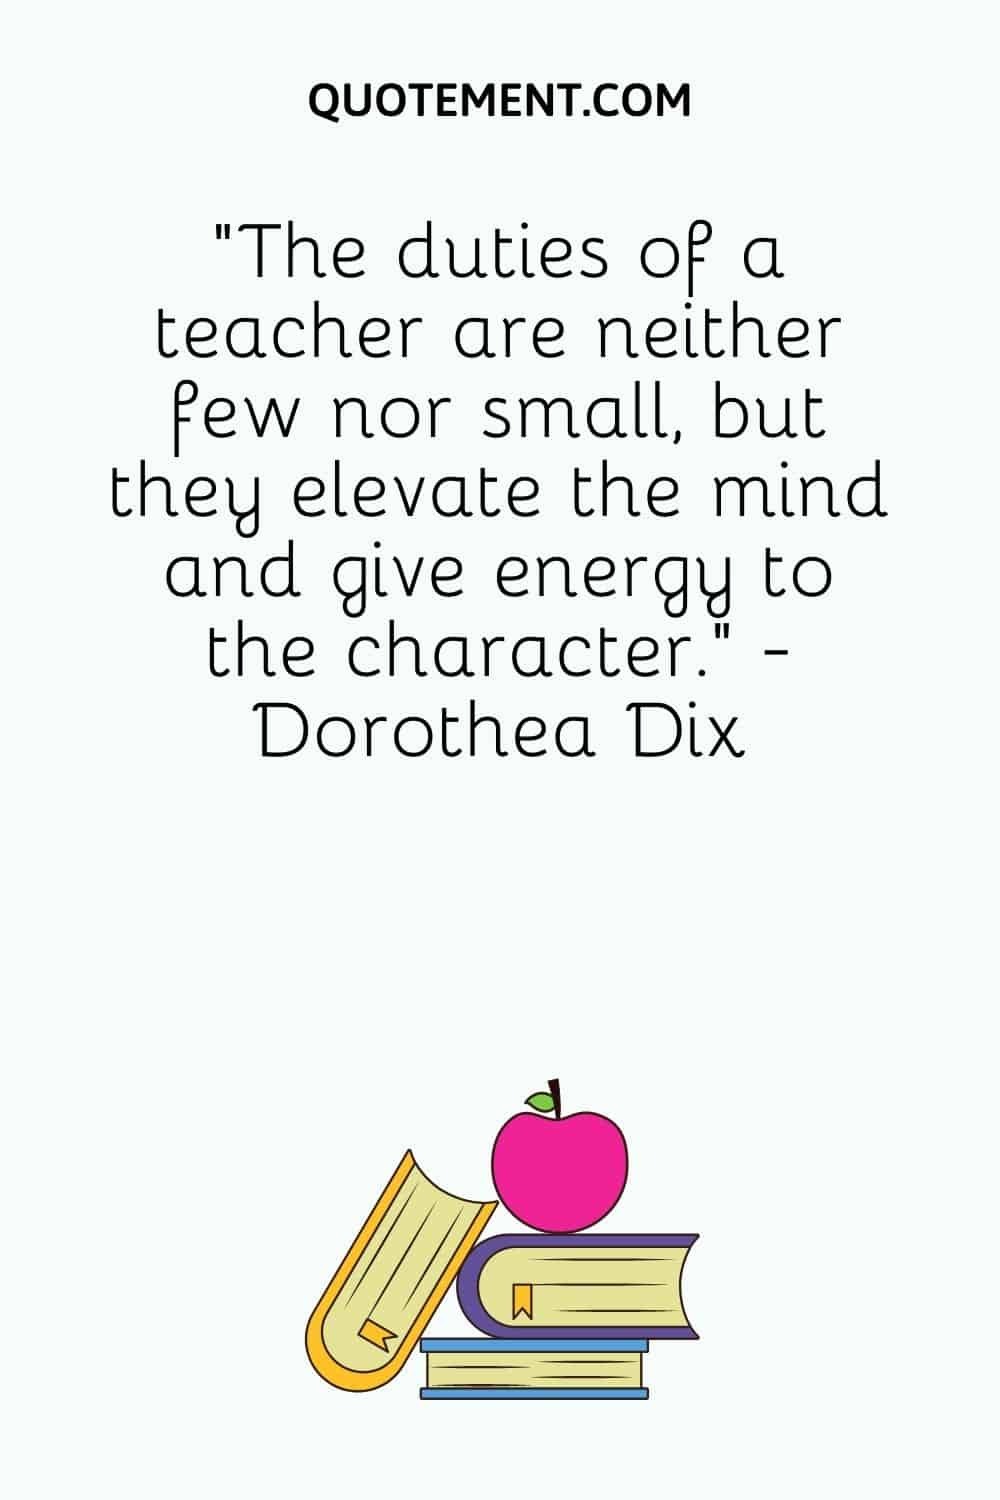 The duties of a teacher are neither few nor small